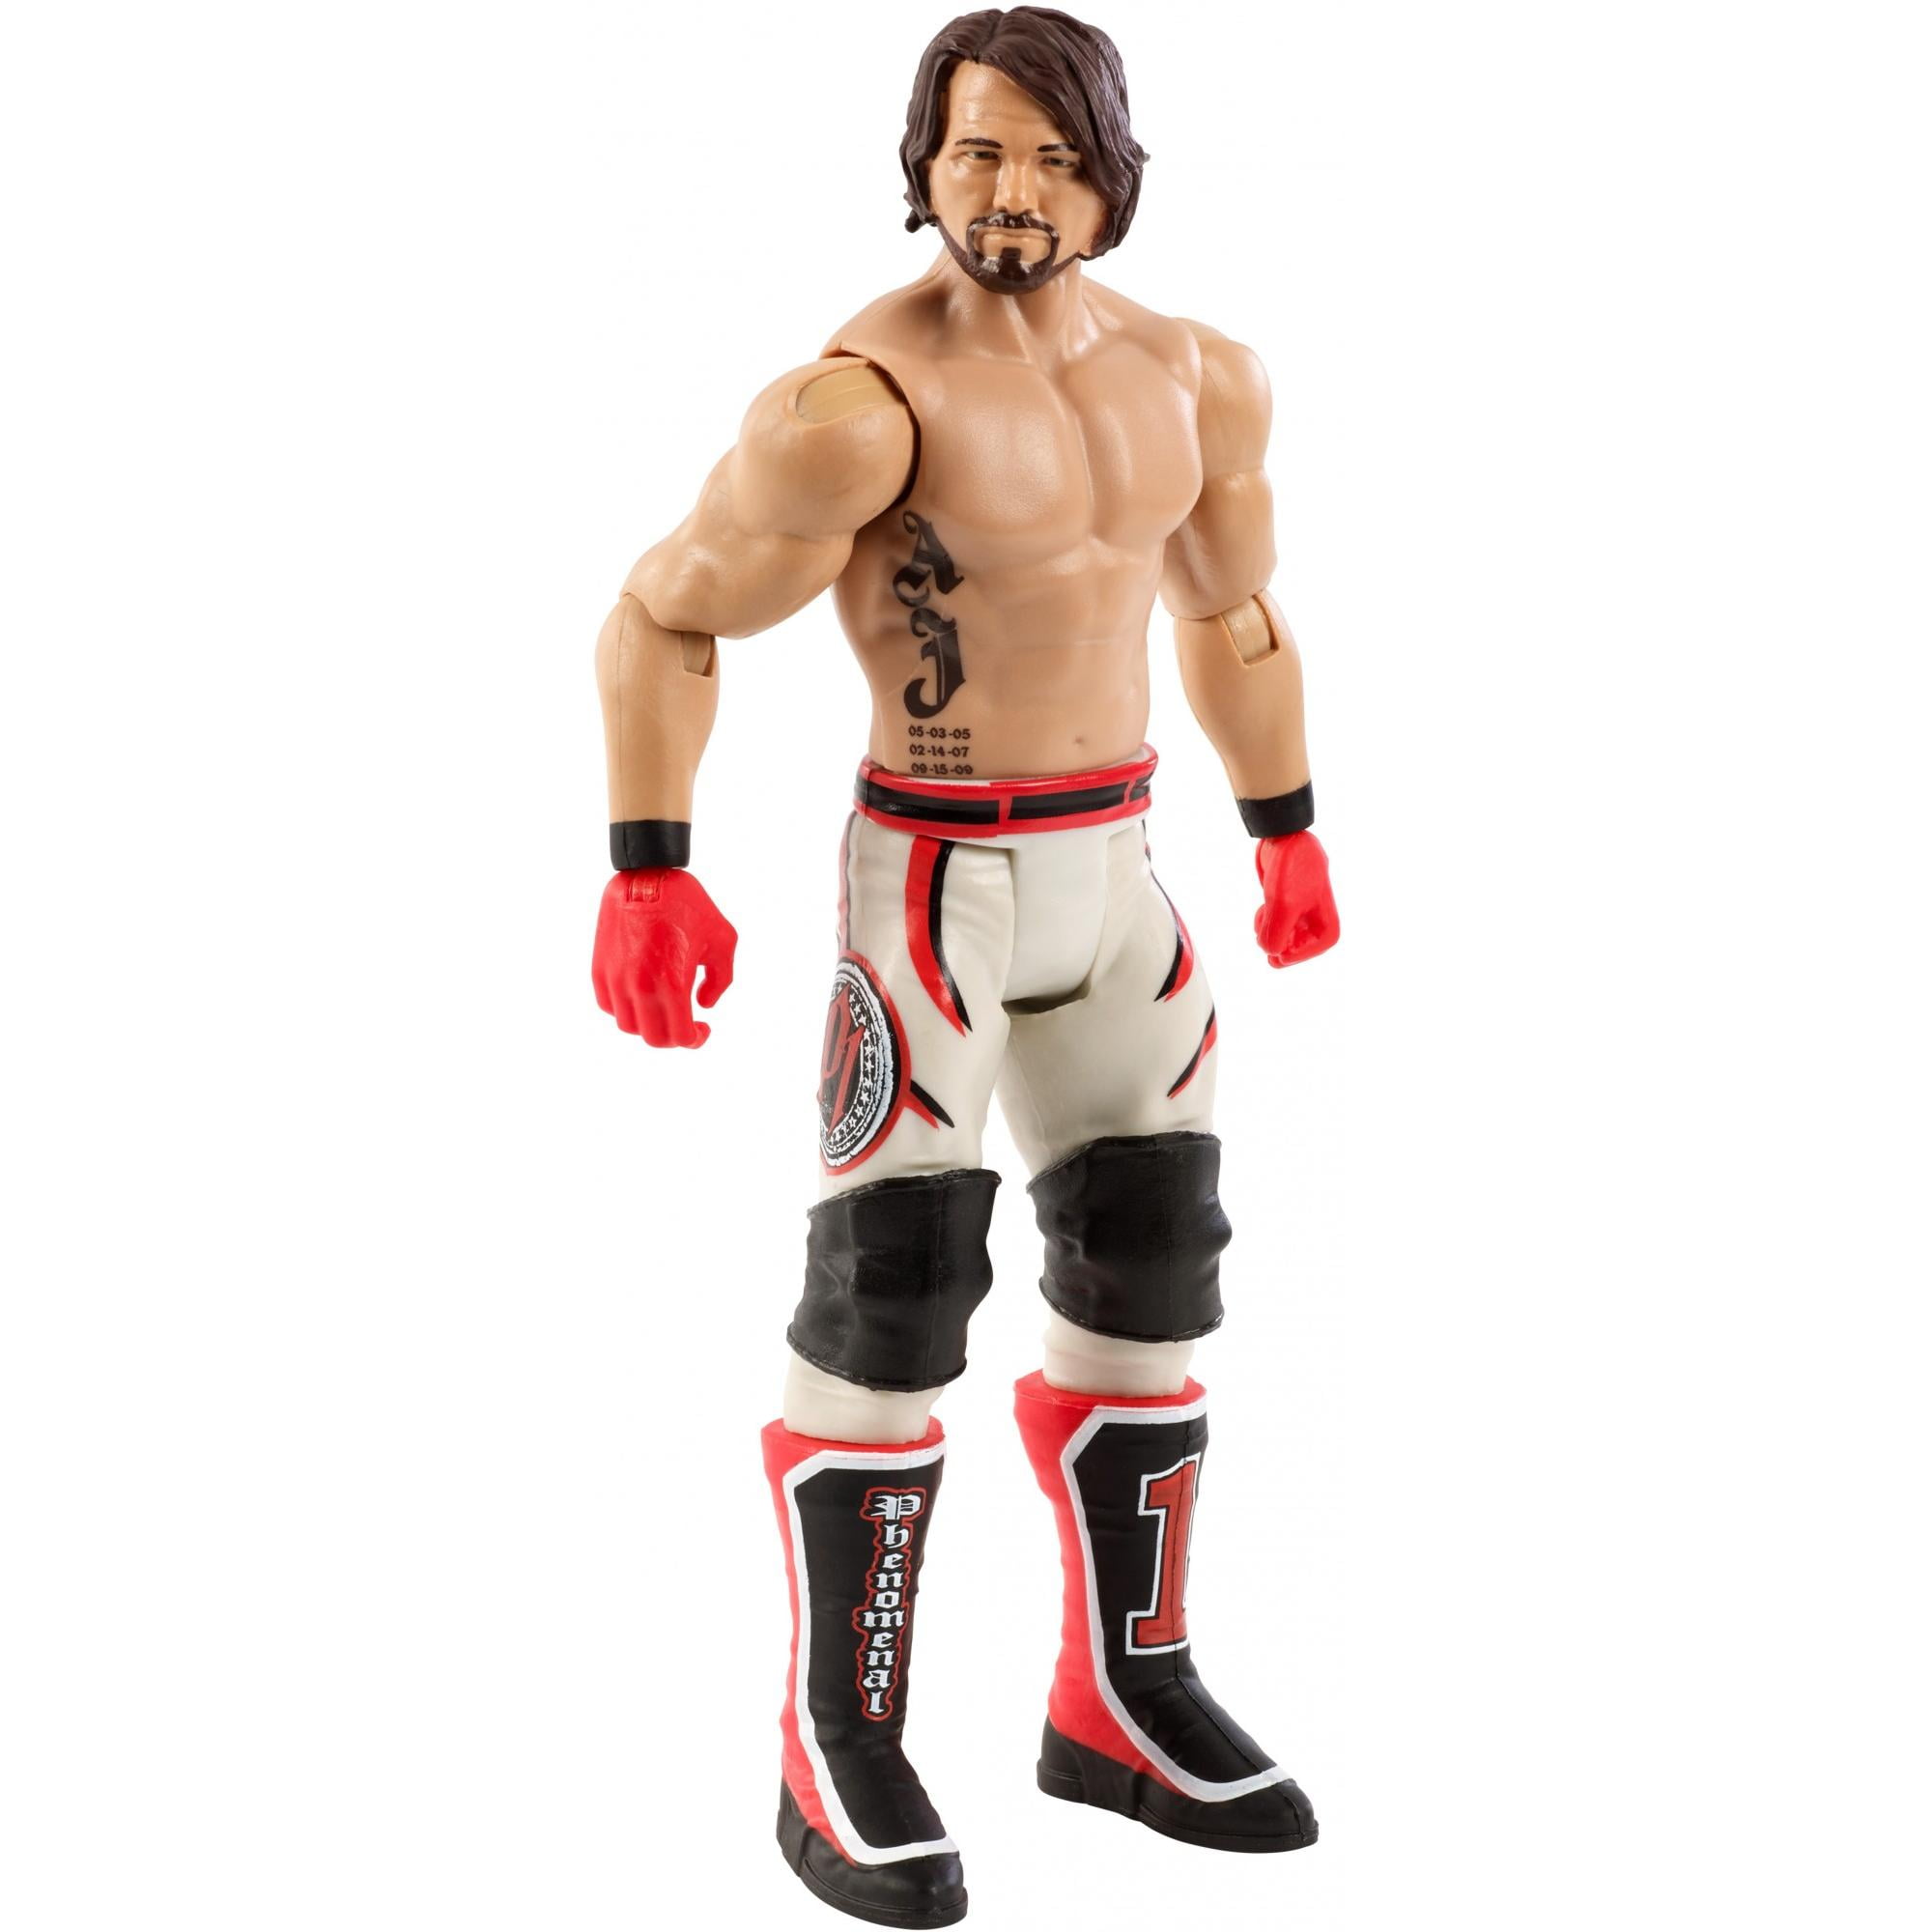 Micro Collection, 3" Action Figure Toy Mattel AJ Styles Details about   WWE: Wrestling 